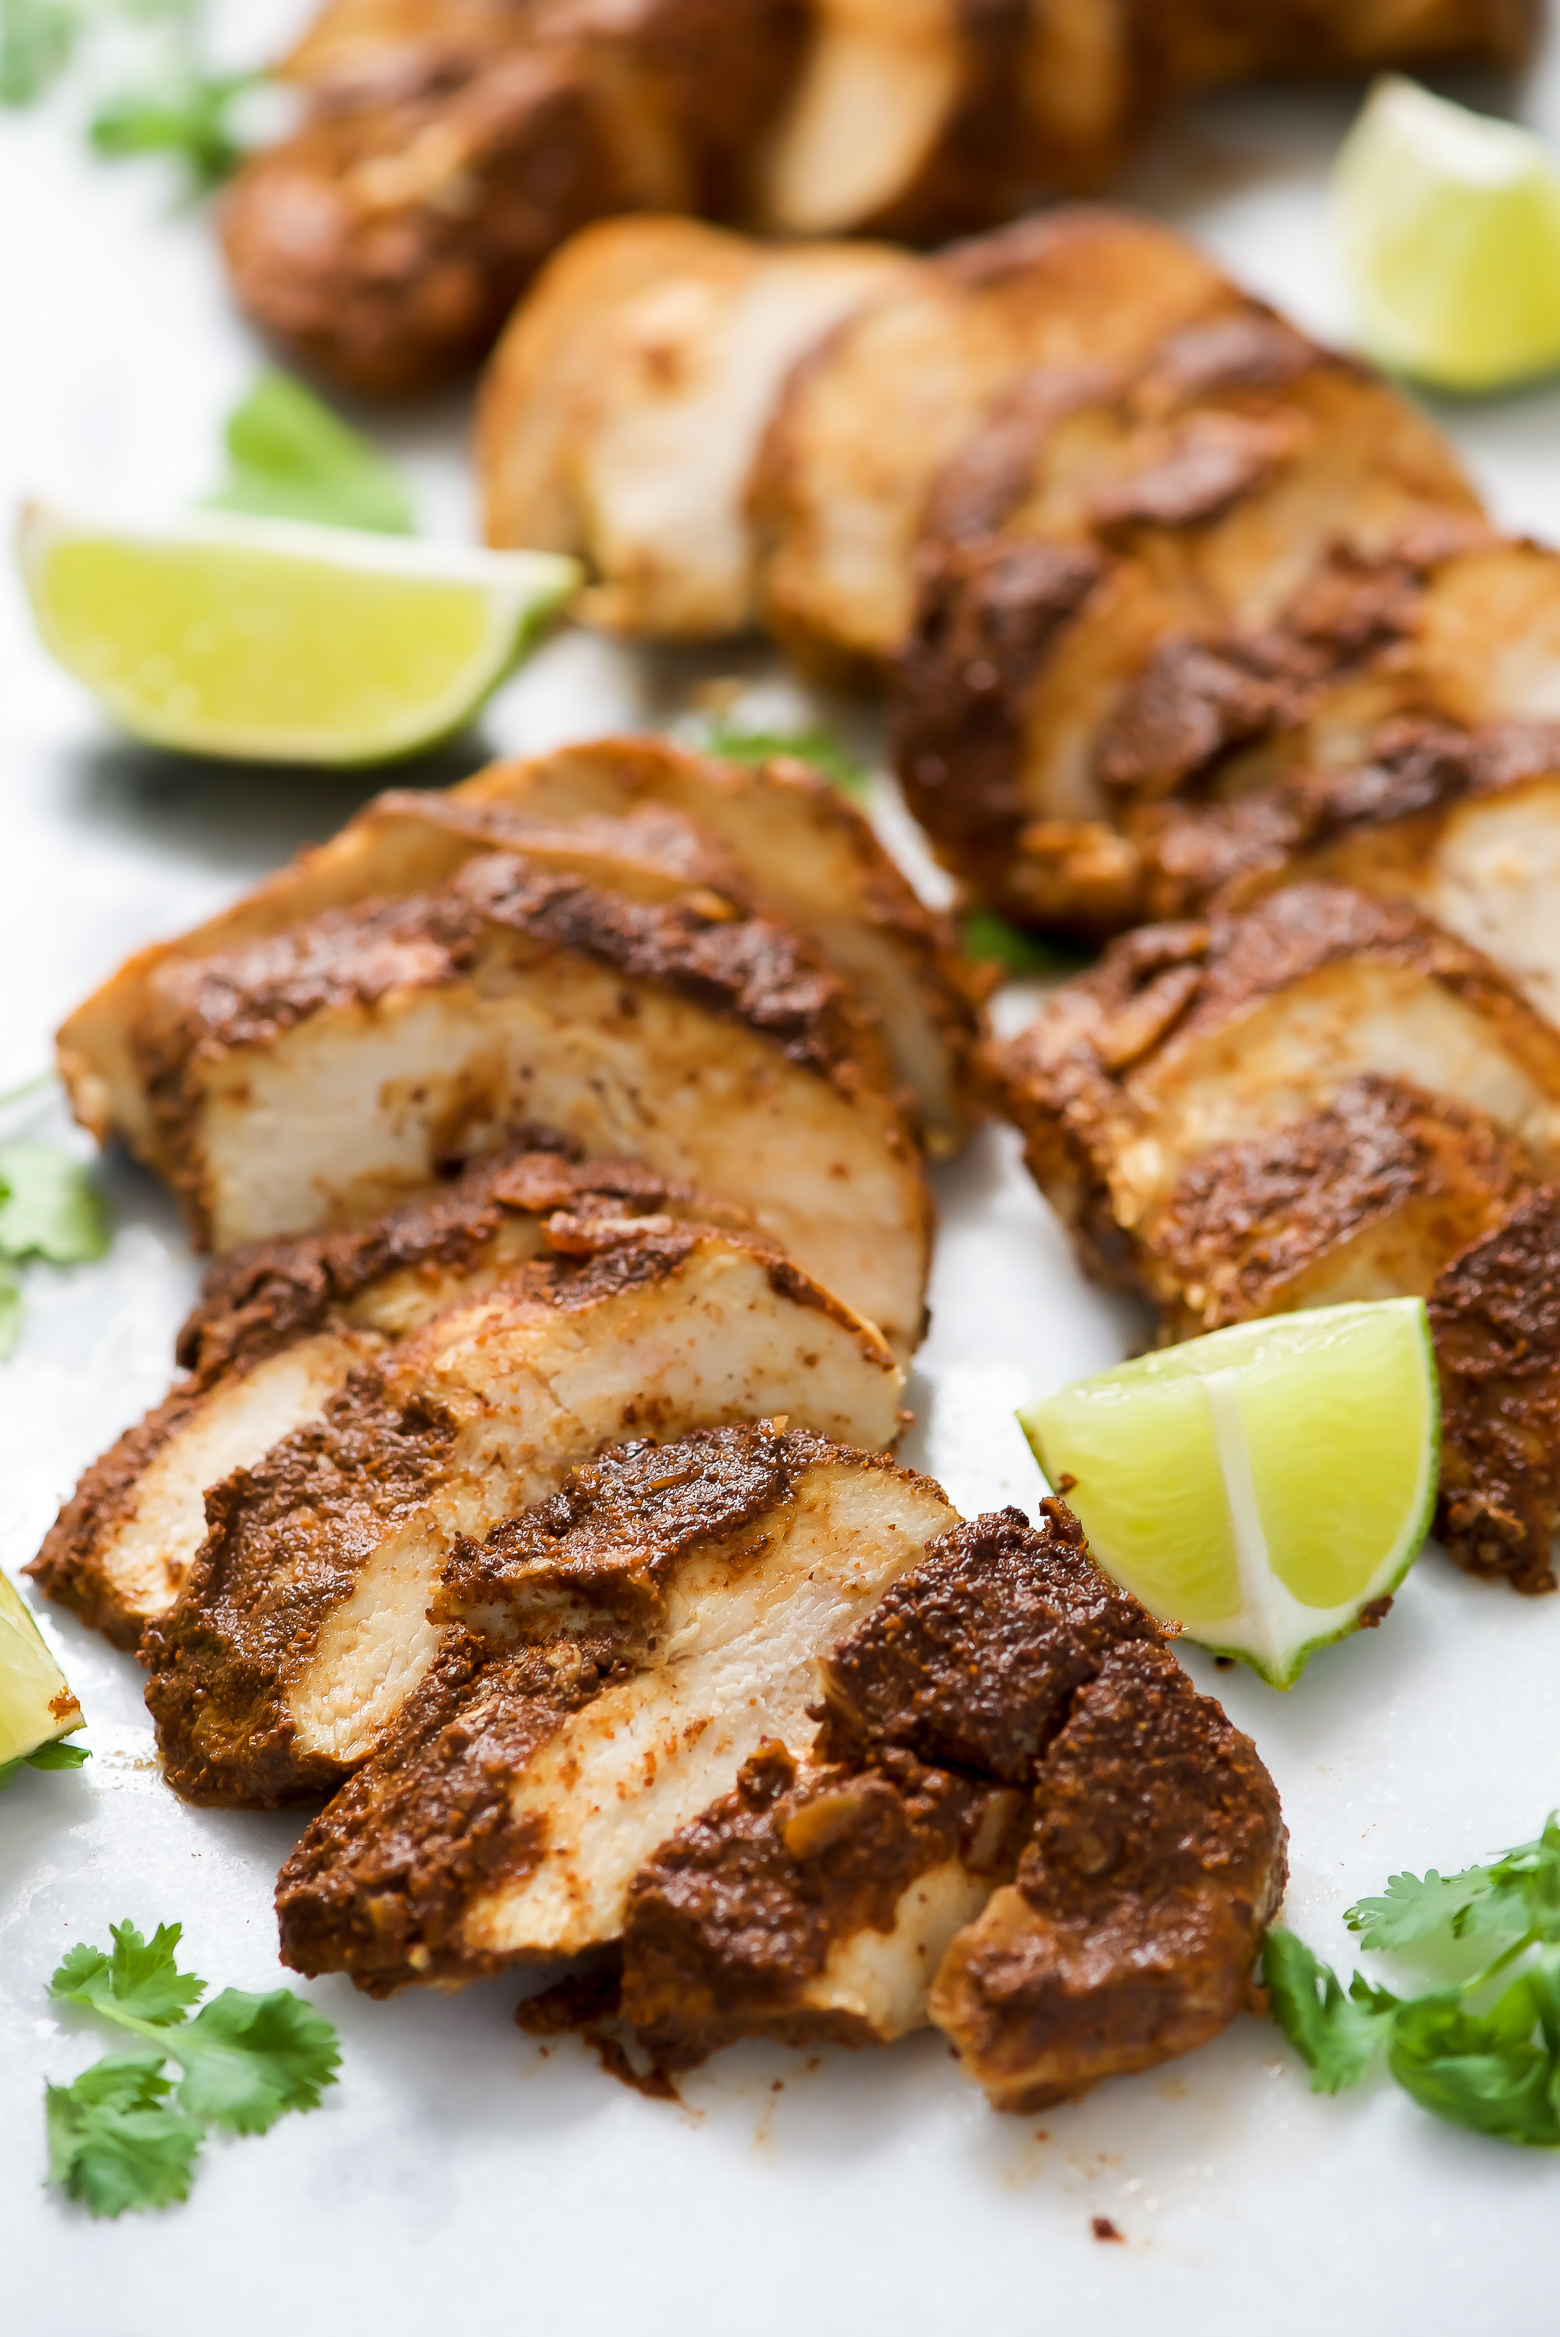 3 Ingredient Mexican Lime Chicken is a flavorful and amazingly delicious chicken that couldn't be any simpler to make. Perfect to add to tacos, burritos, tostadas and even salads! It will be your go to soon enough!